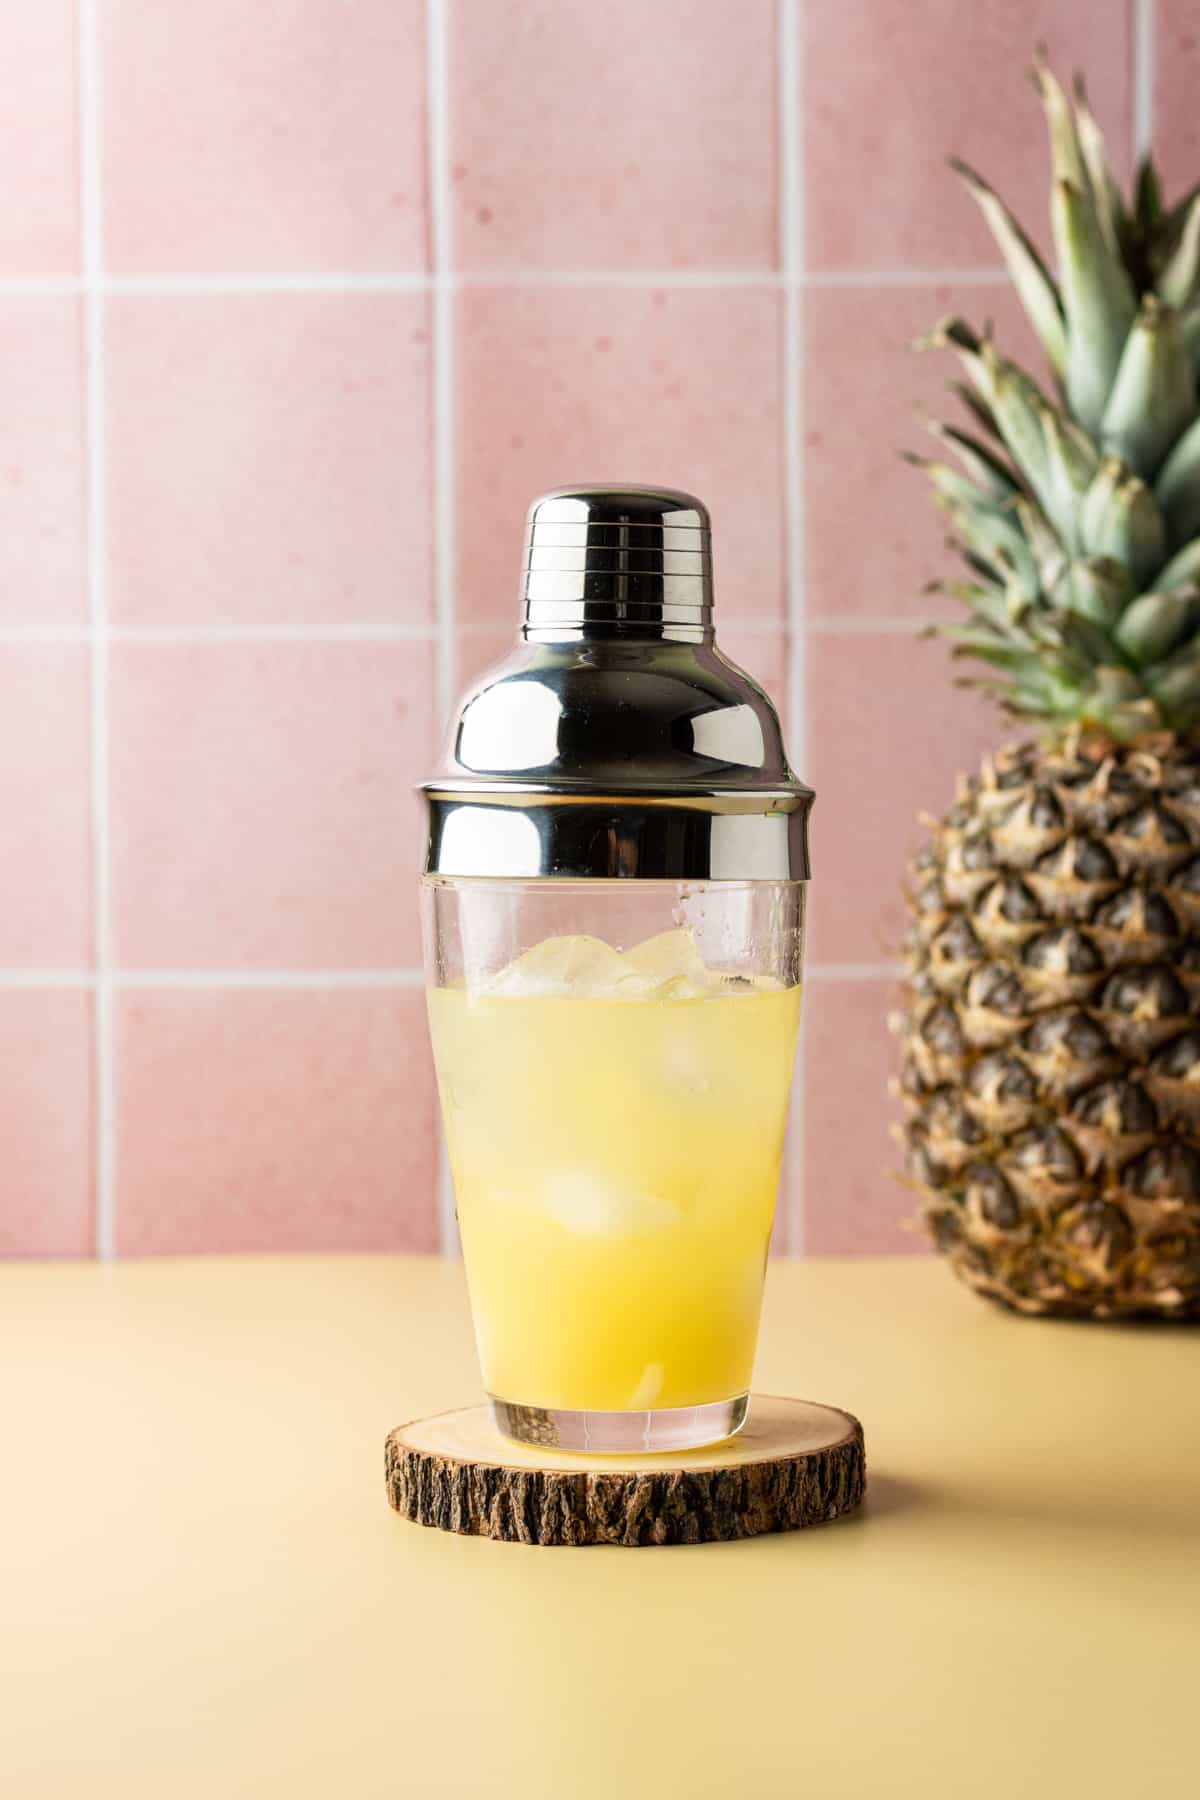 Pineapple juice in a cocktail shaker on a wooden coaster.